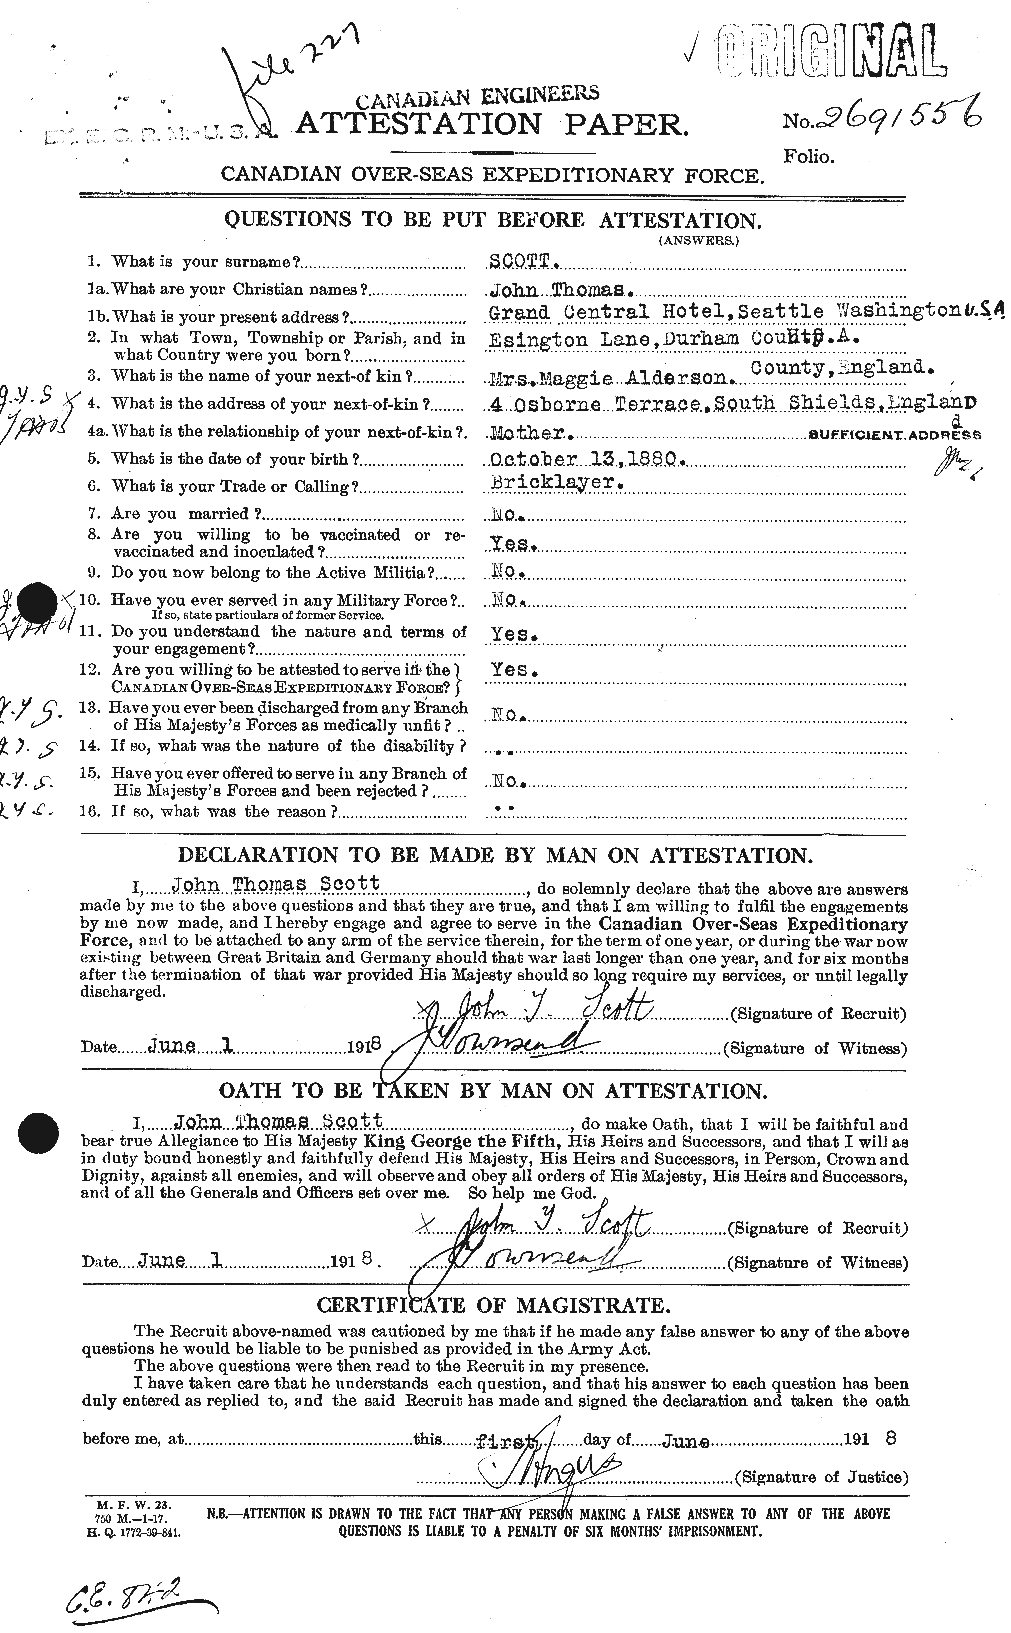 Personnel Records of the First World War - CEF 084416a